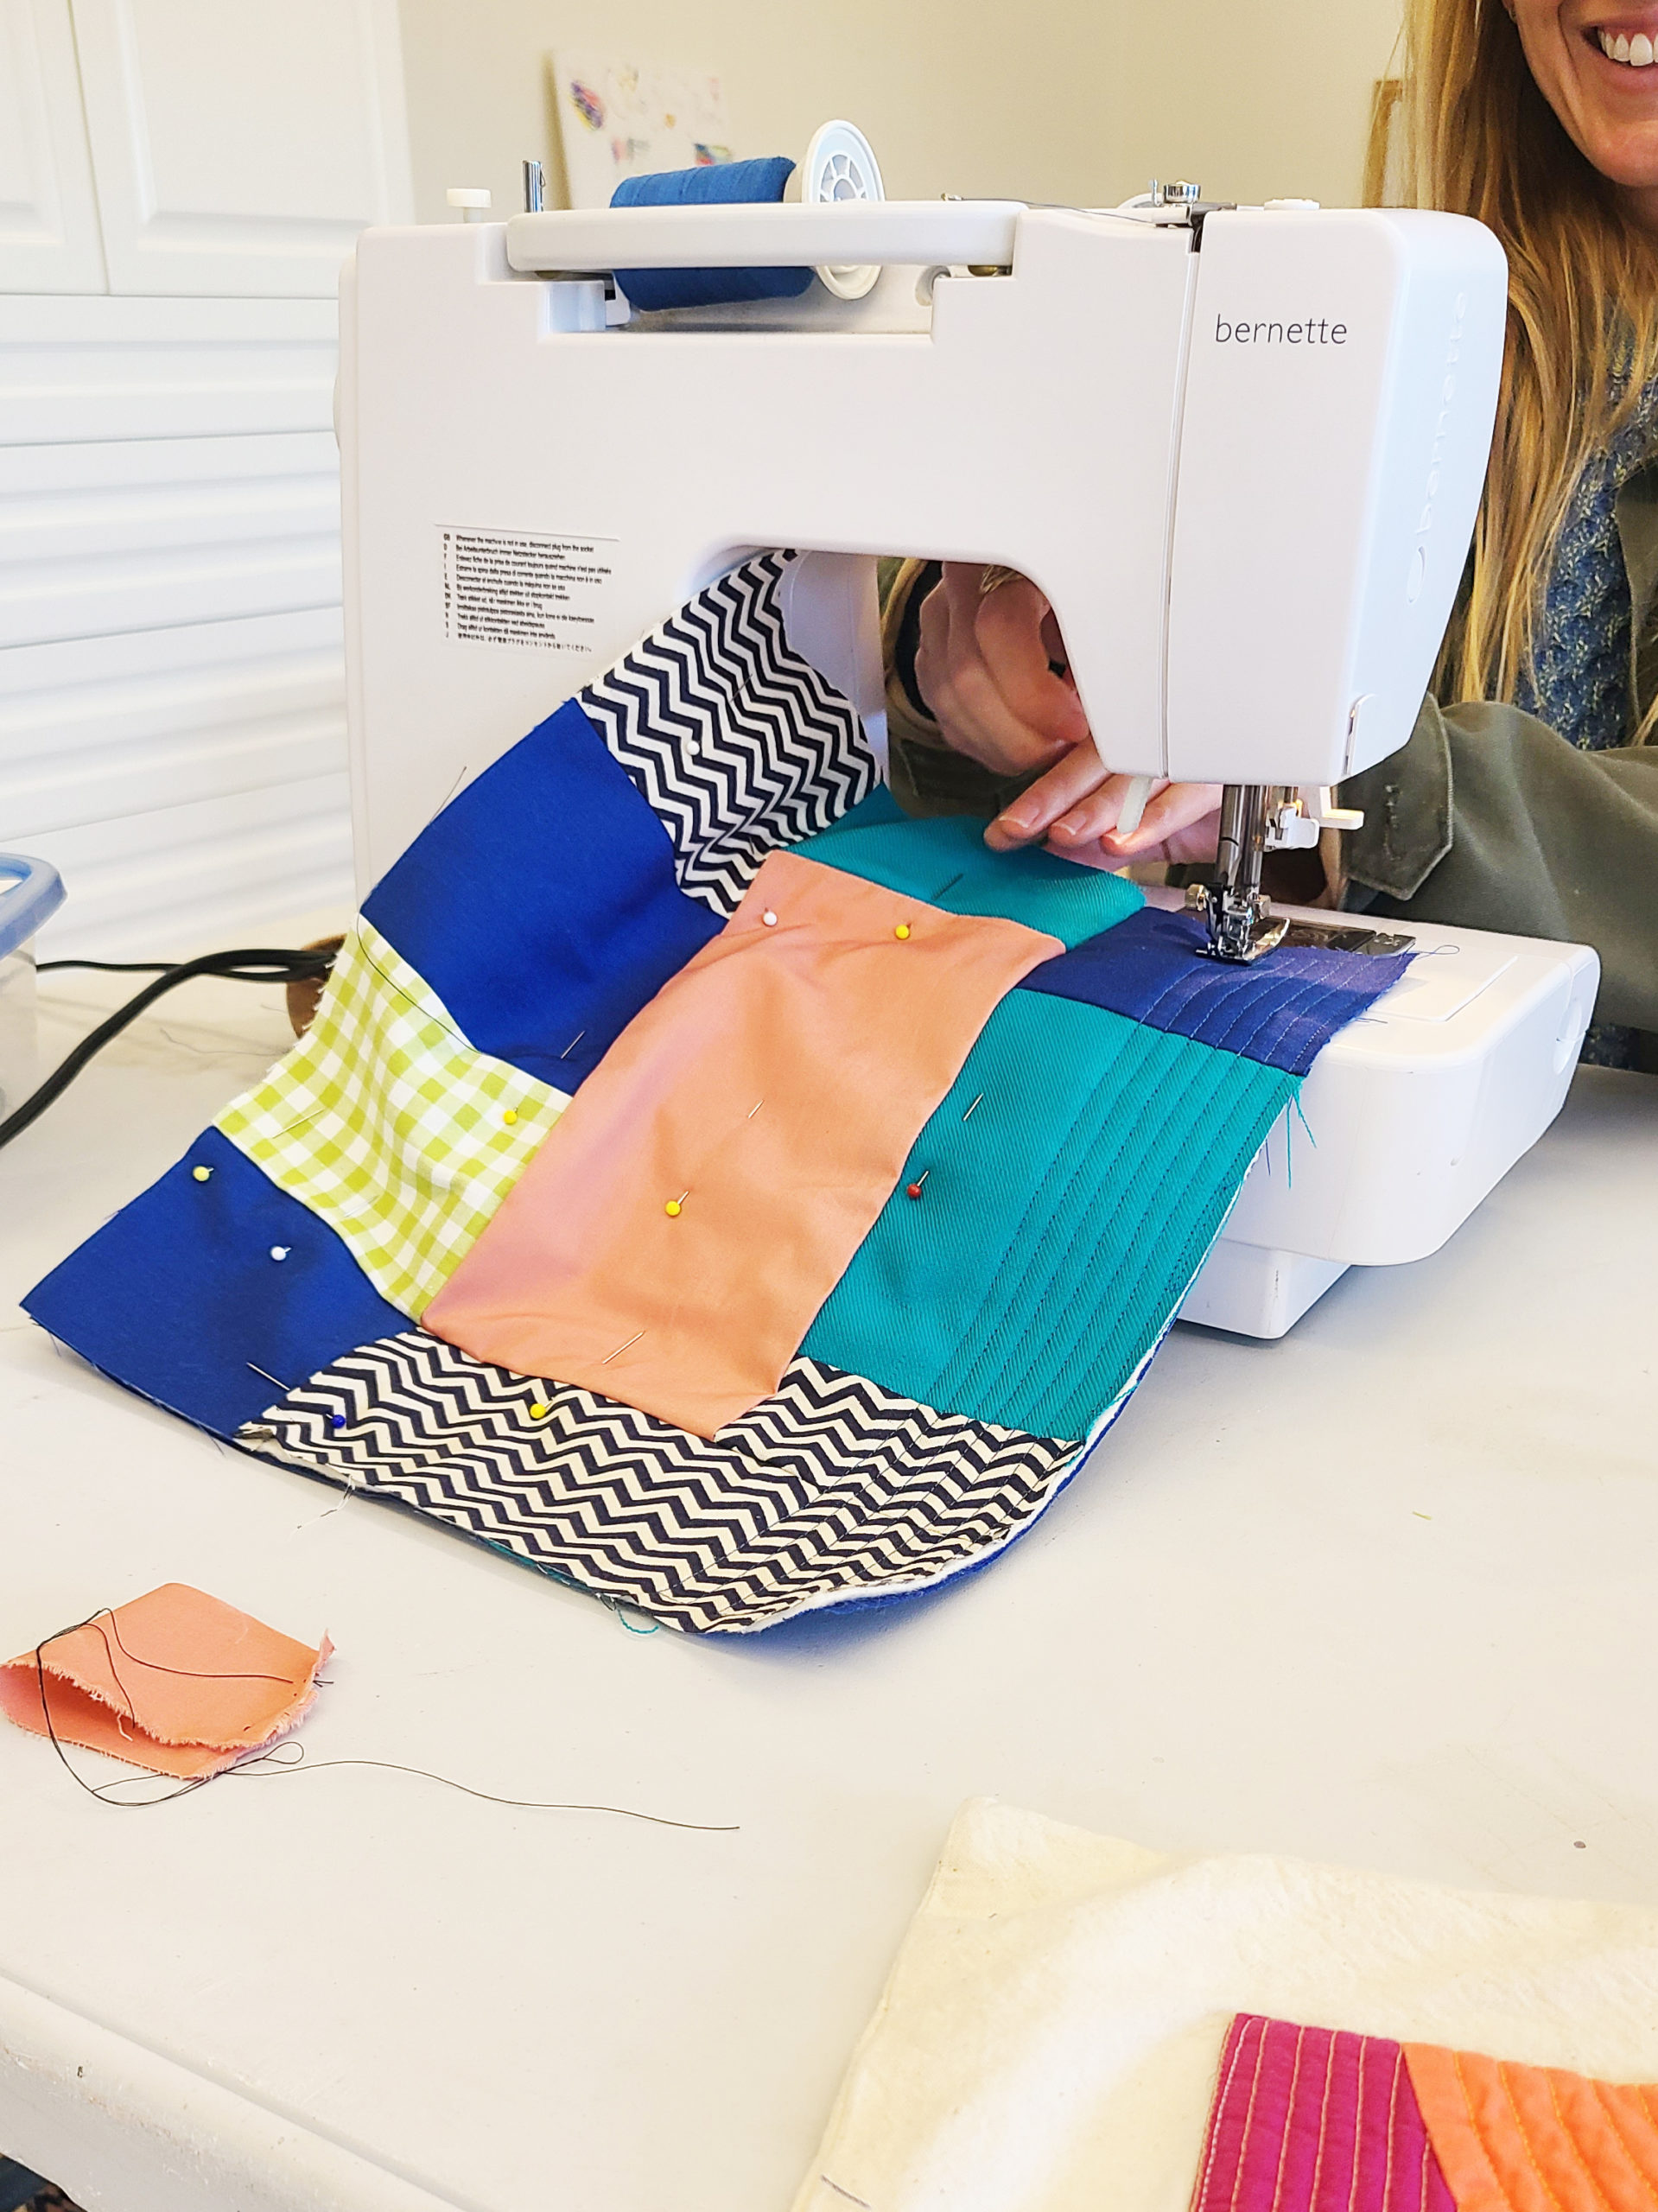 Learn to Quilt  Upgrade a Jacket or Bag – San Diego Craft Collective